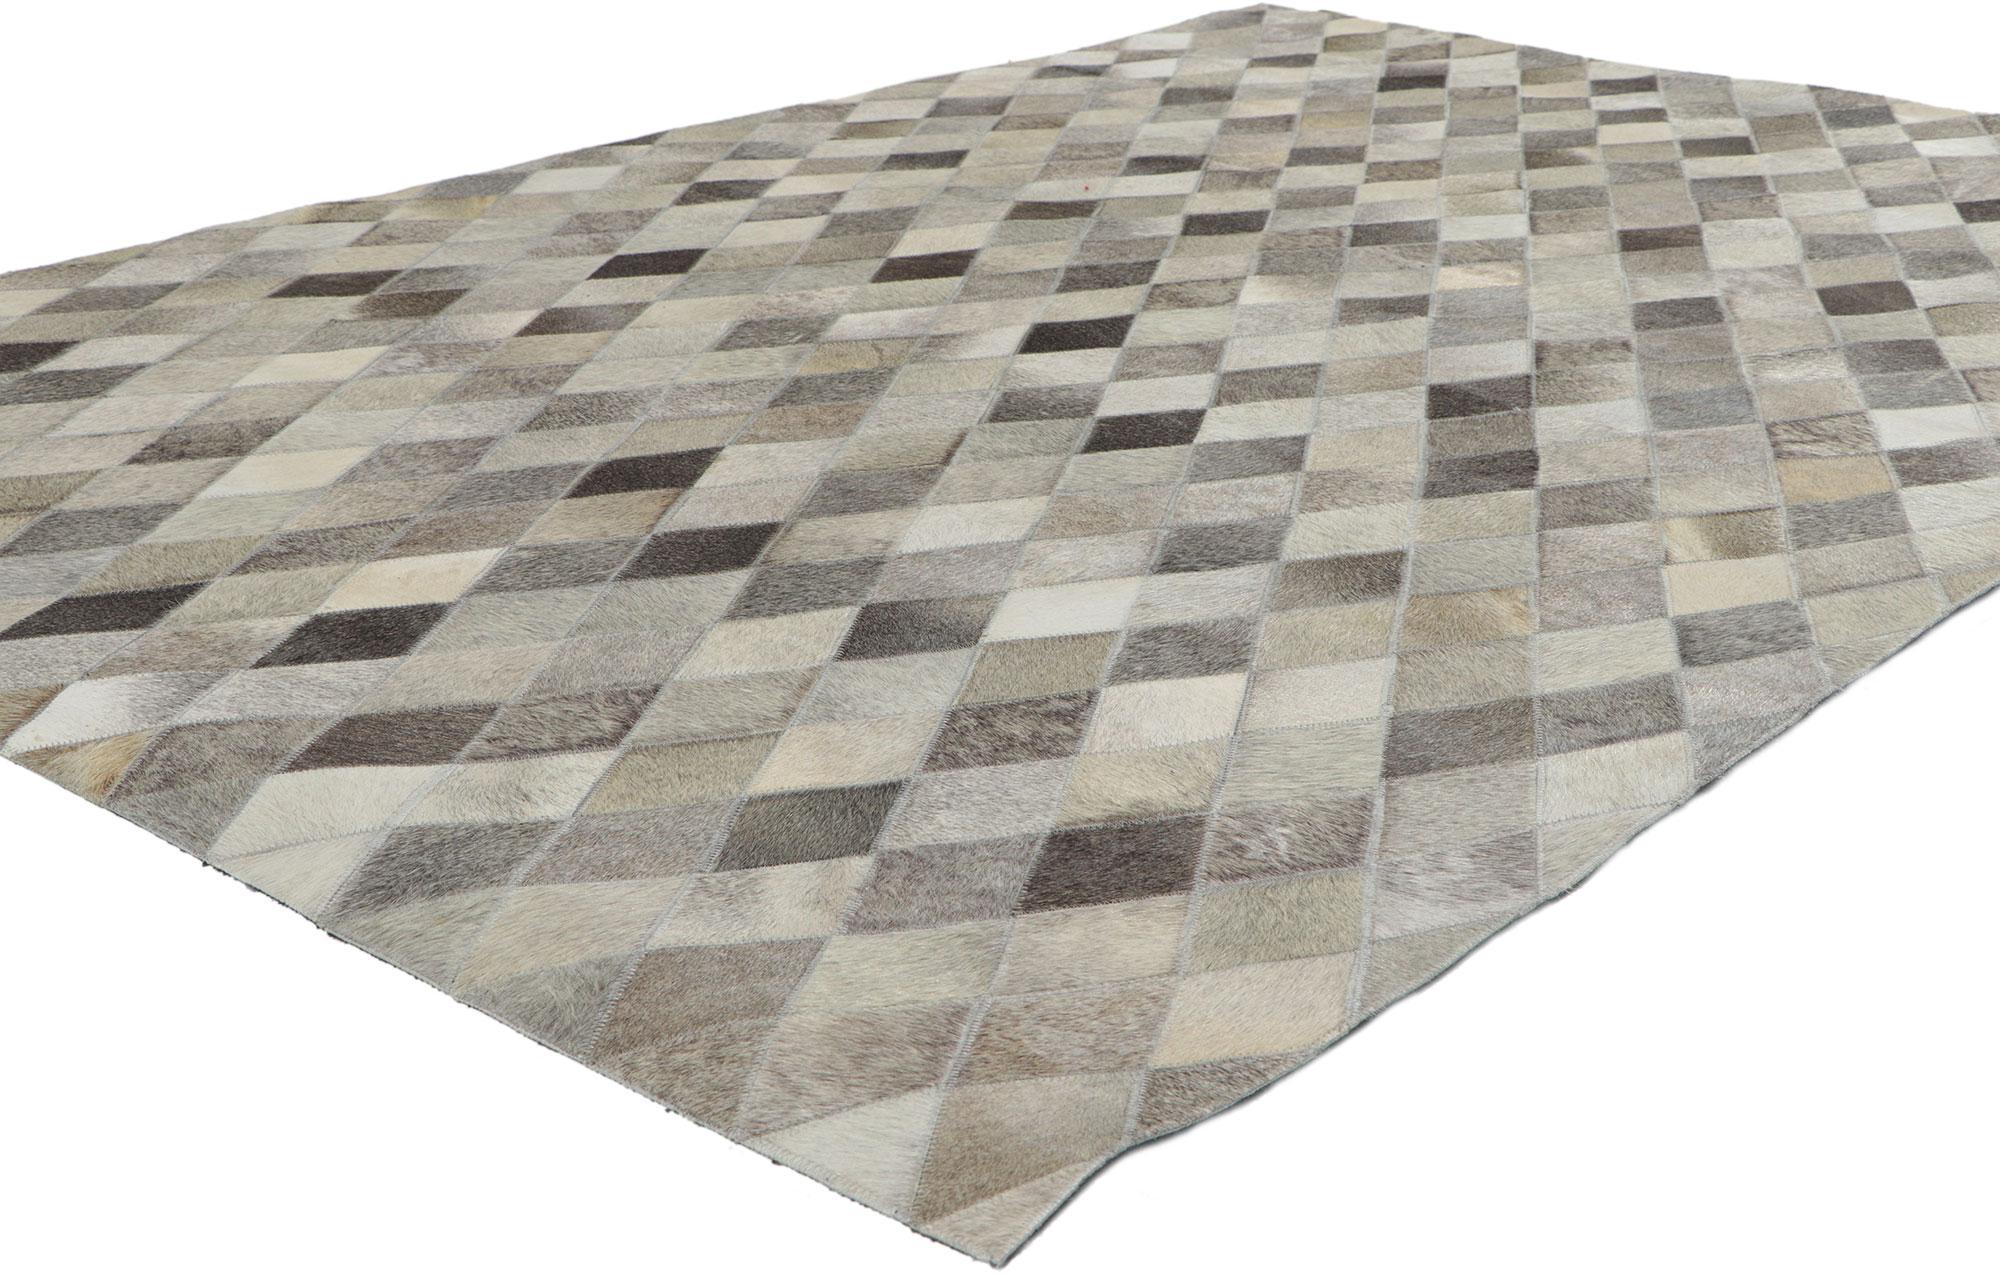 30908 New Contemporary Patchwork Cowhide Rug with Modern Style, 05'00 x 07'05. Call the wild indoors and bring a sense of adventure home with this handcrafted cowhide rug. Showcasing a modern design, incredible detail and texture, this leather